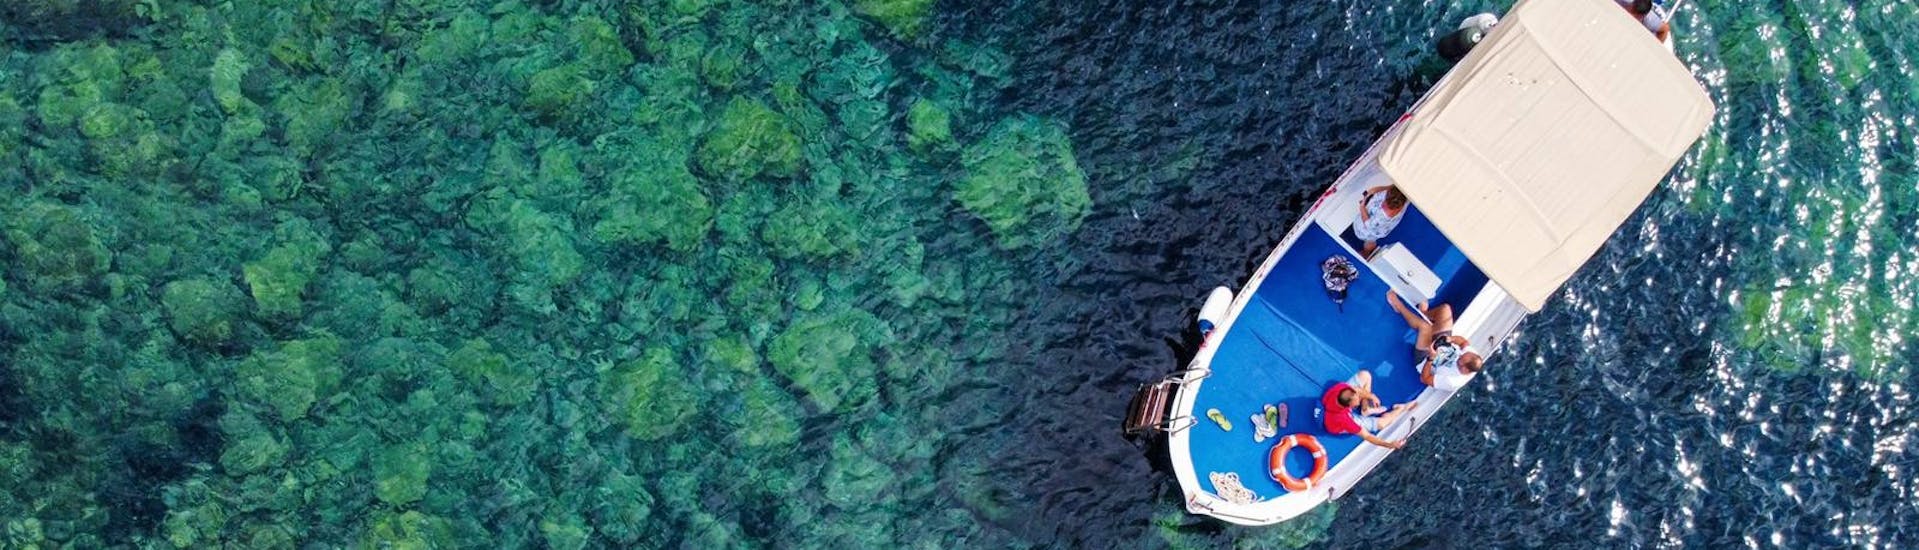 Image of our boat from above as it navigates the waters of the Ionian Sea during a boat trip from Letojanni along the coast of Taormina with Escursioni In Barca con Giacomo.